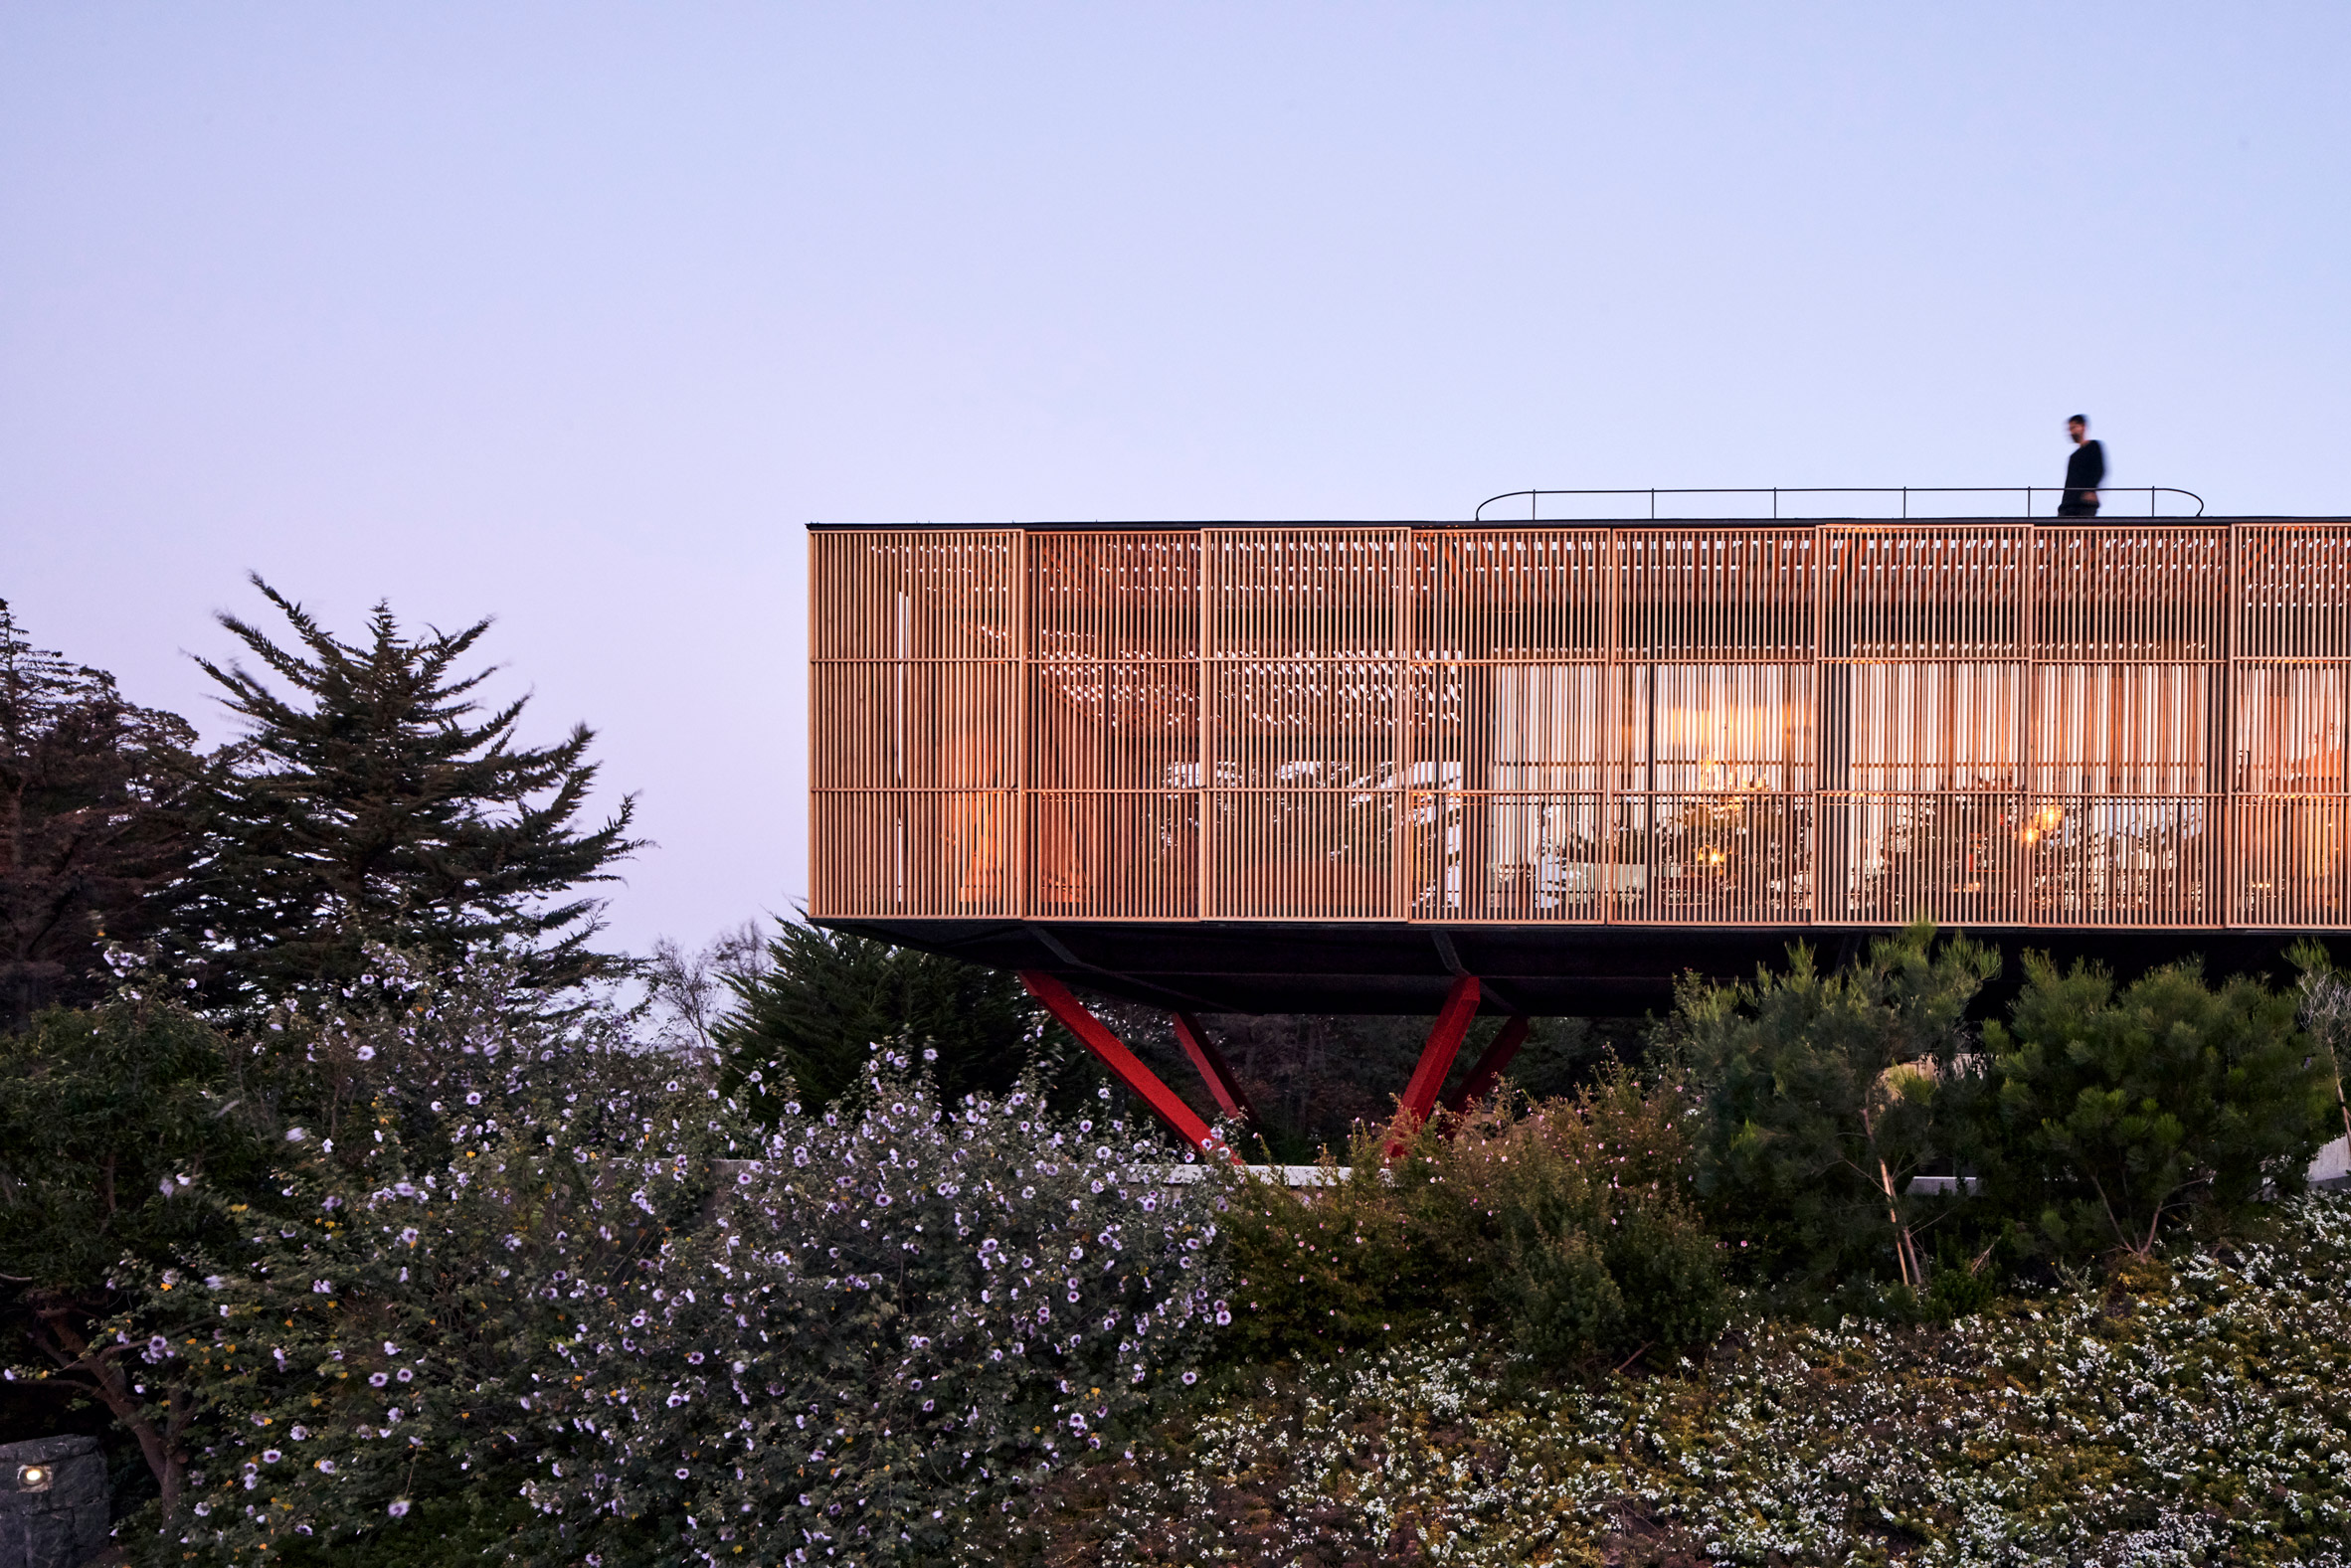 Exterior of Engawa House by Santiago Valdivieso and Stefano Rolla